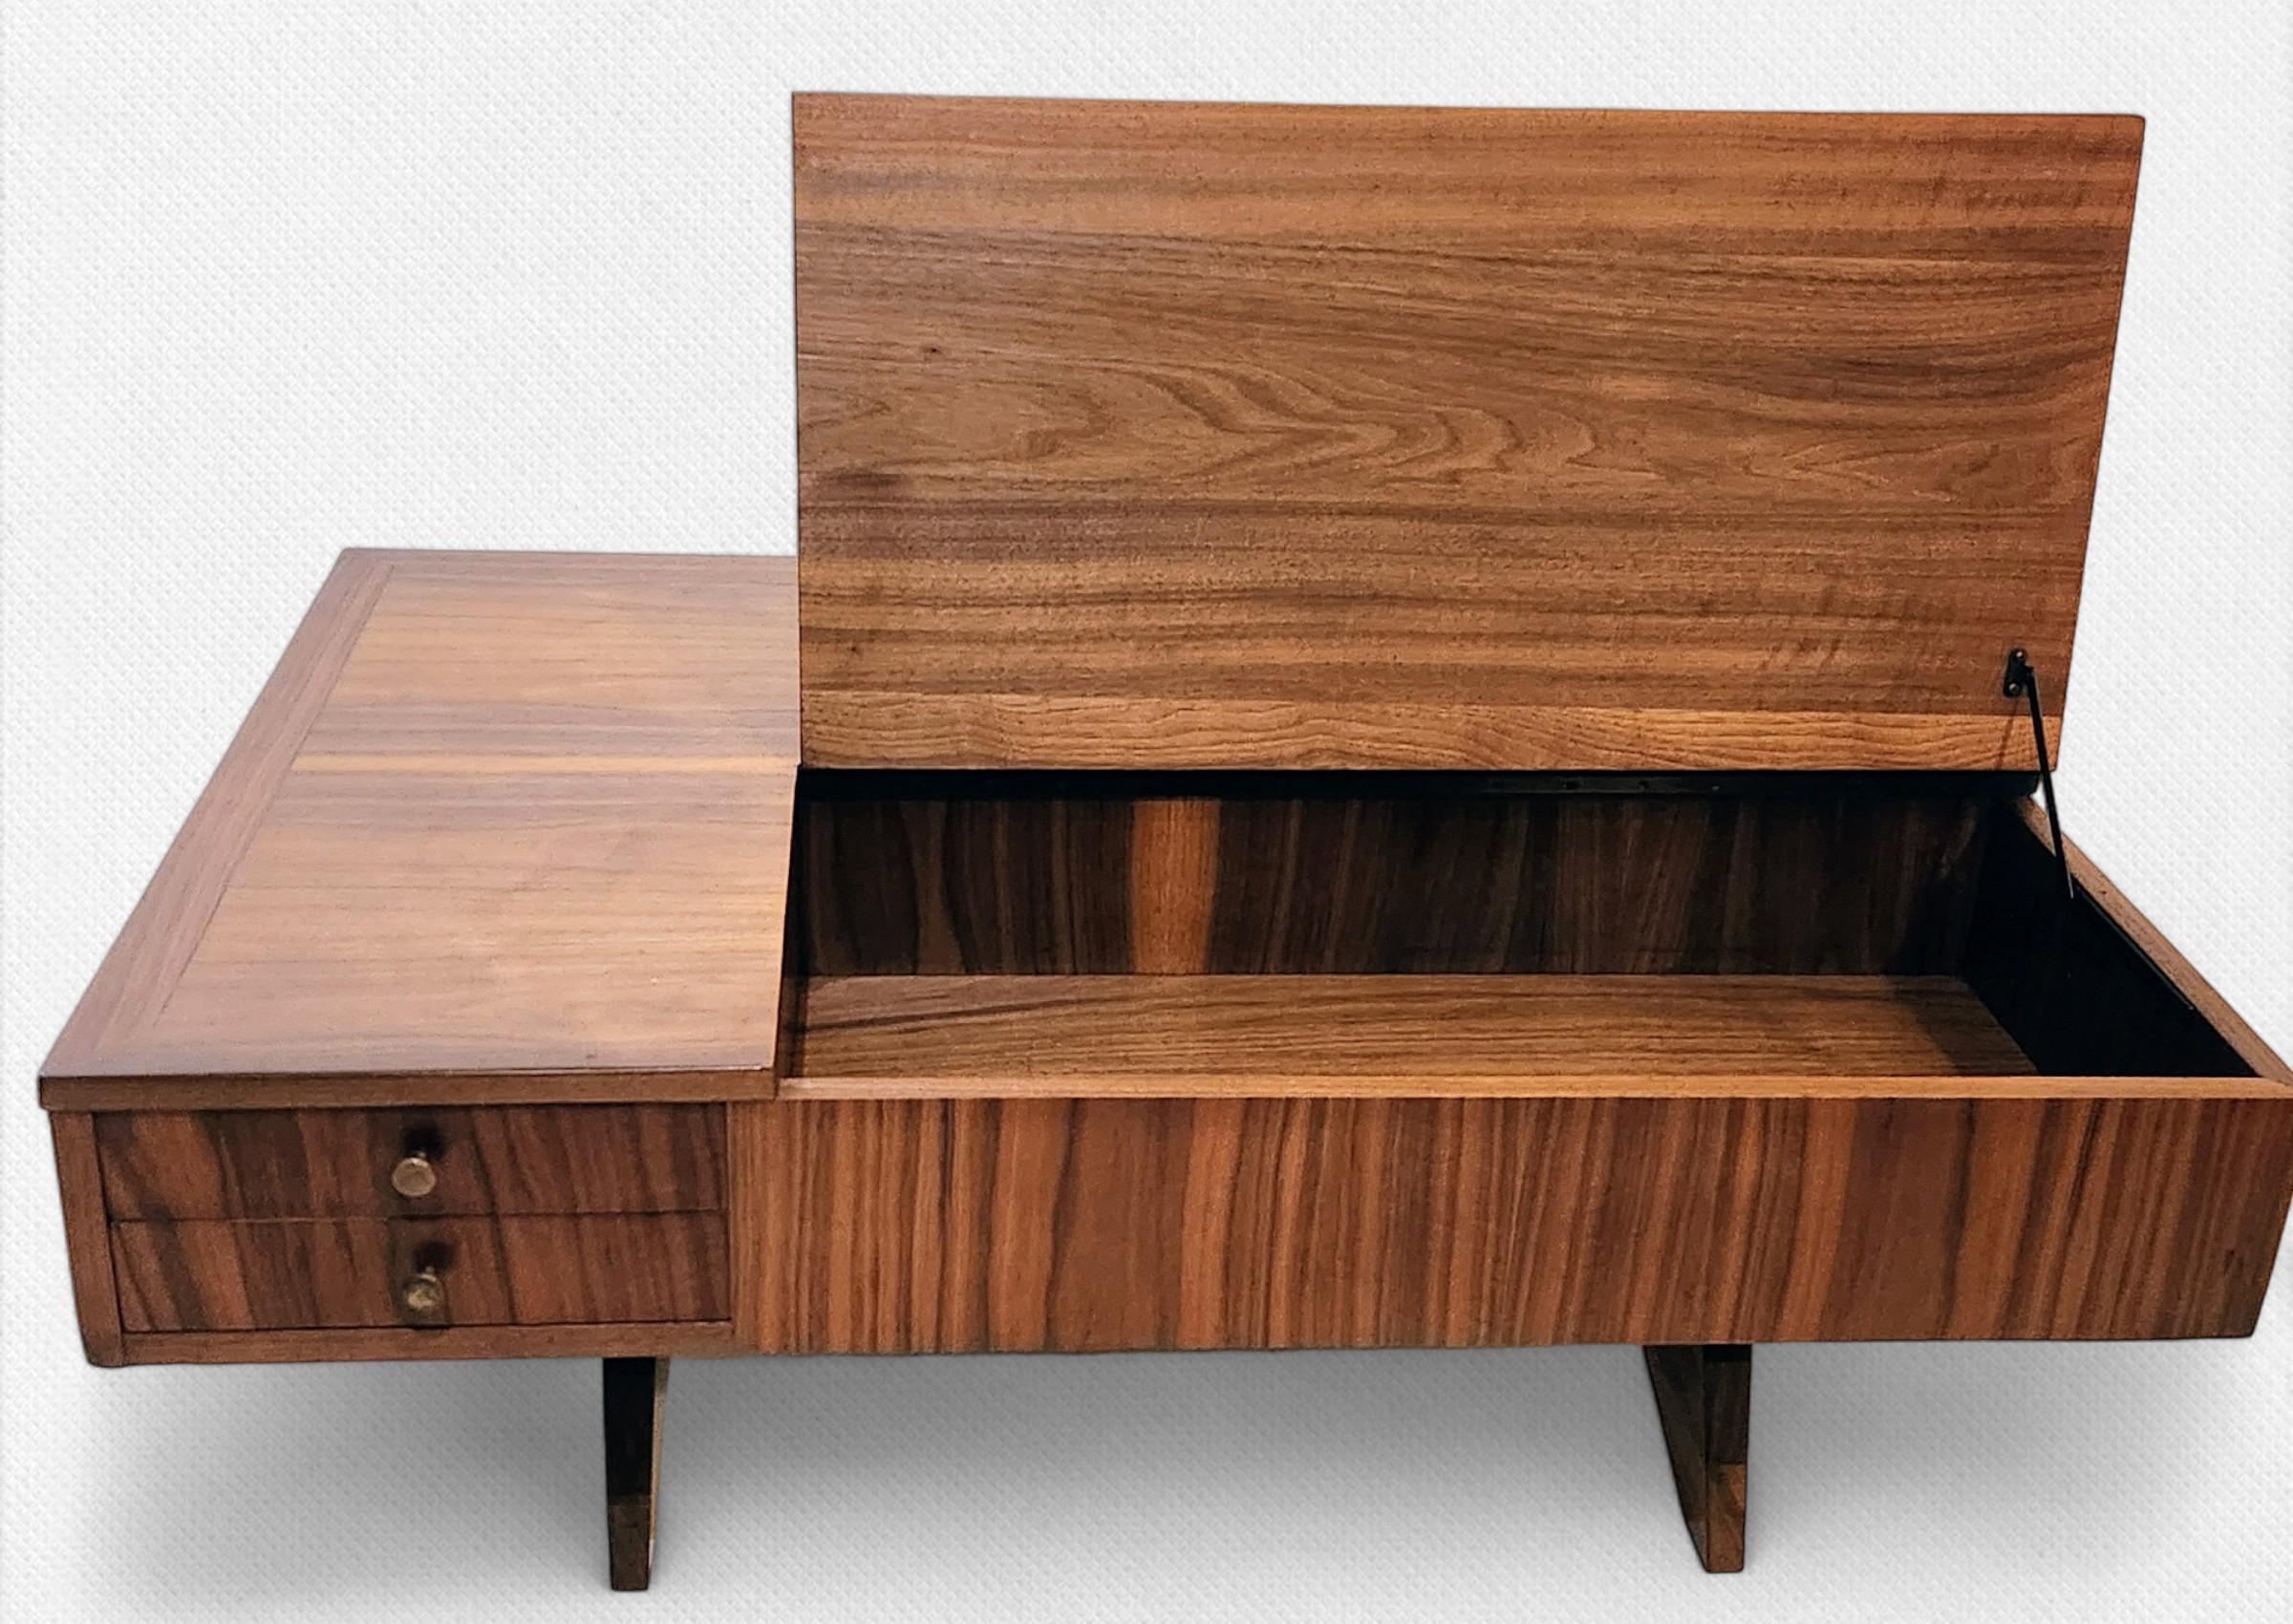 George Nakashima lift-top coffee table model 272 manufactured by Widdicomb in 1959 from his origins line.
The underside of the drawer is stenciled Sundra model 272 dated 3/59.
Widdicomb produced their Nakashima designed line of furniture 